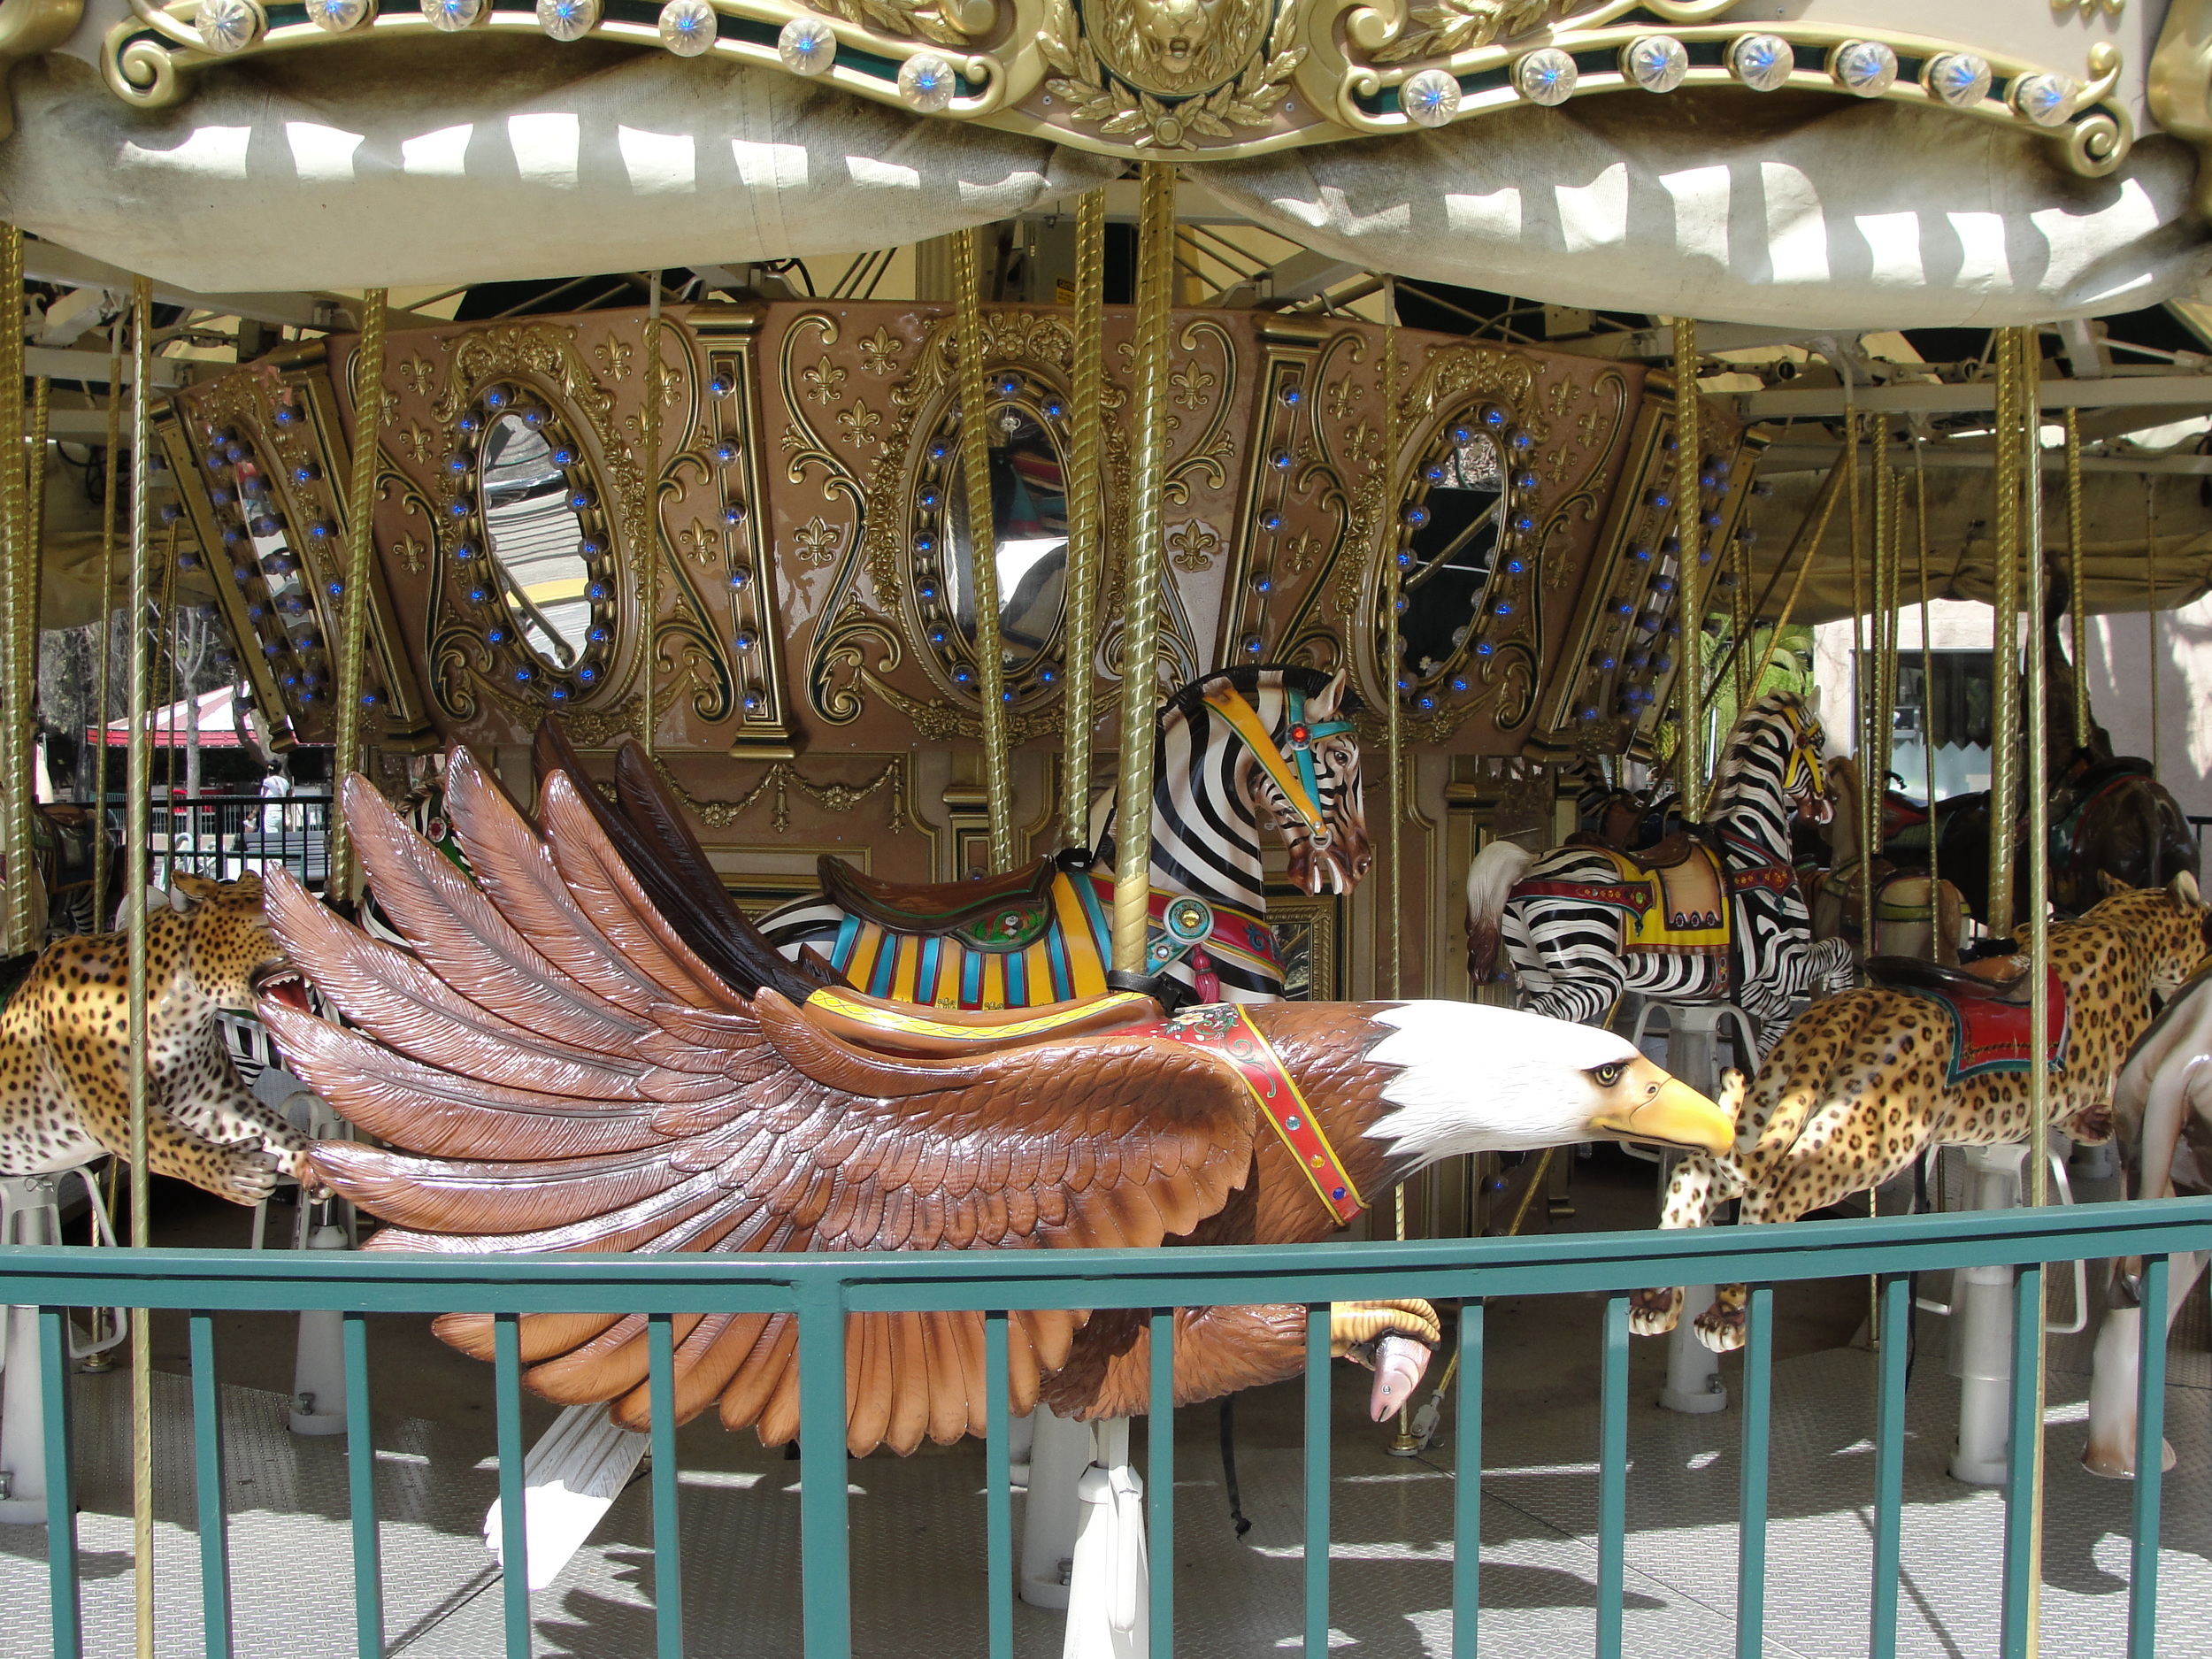 Conservation Carousel at The Oakland Zoo